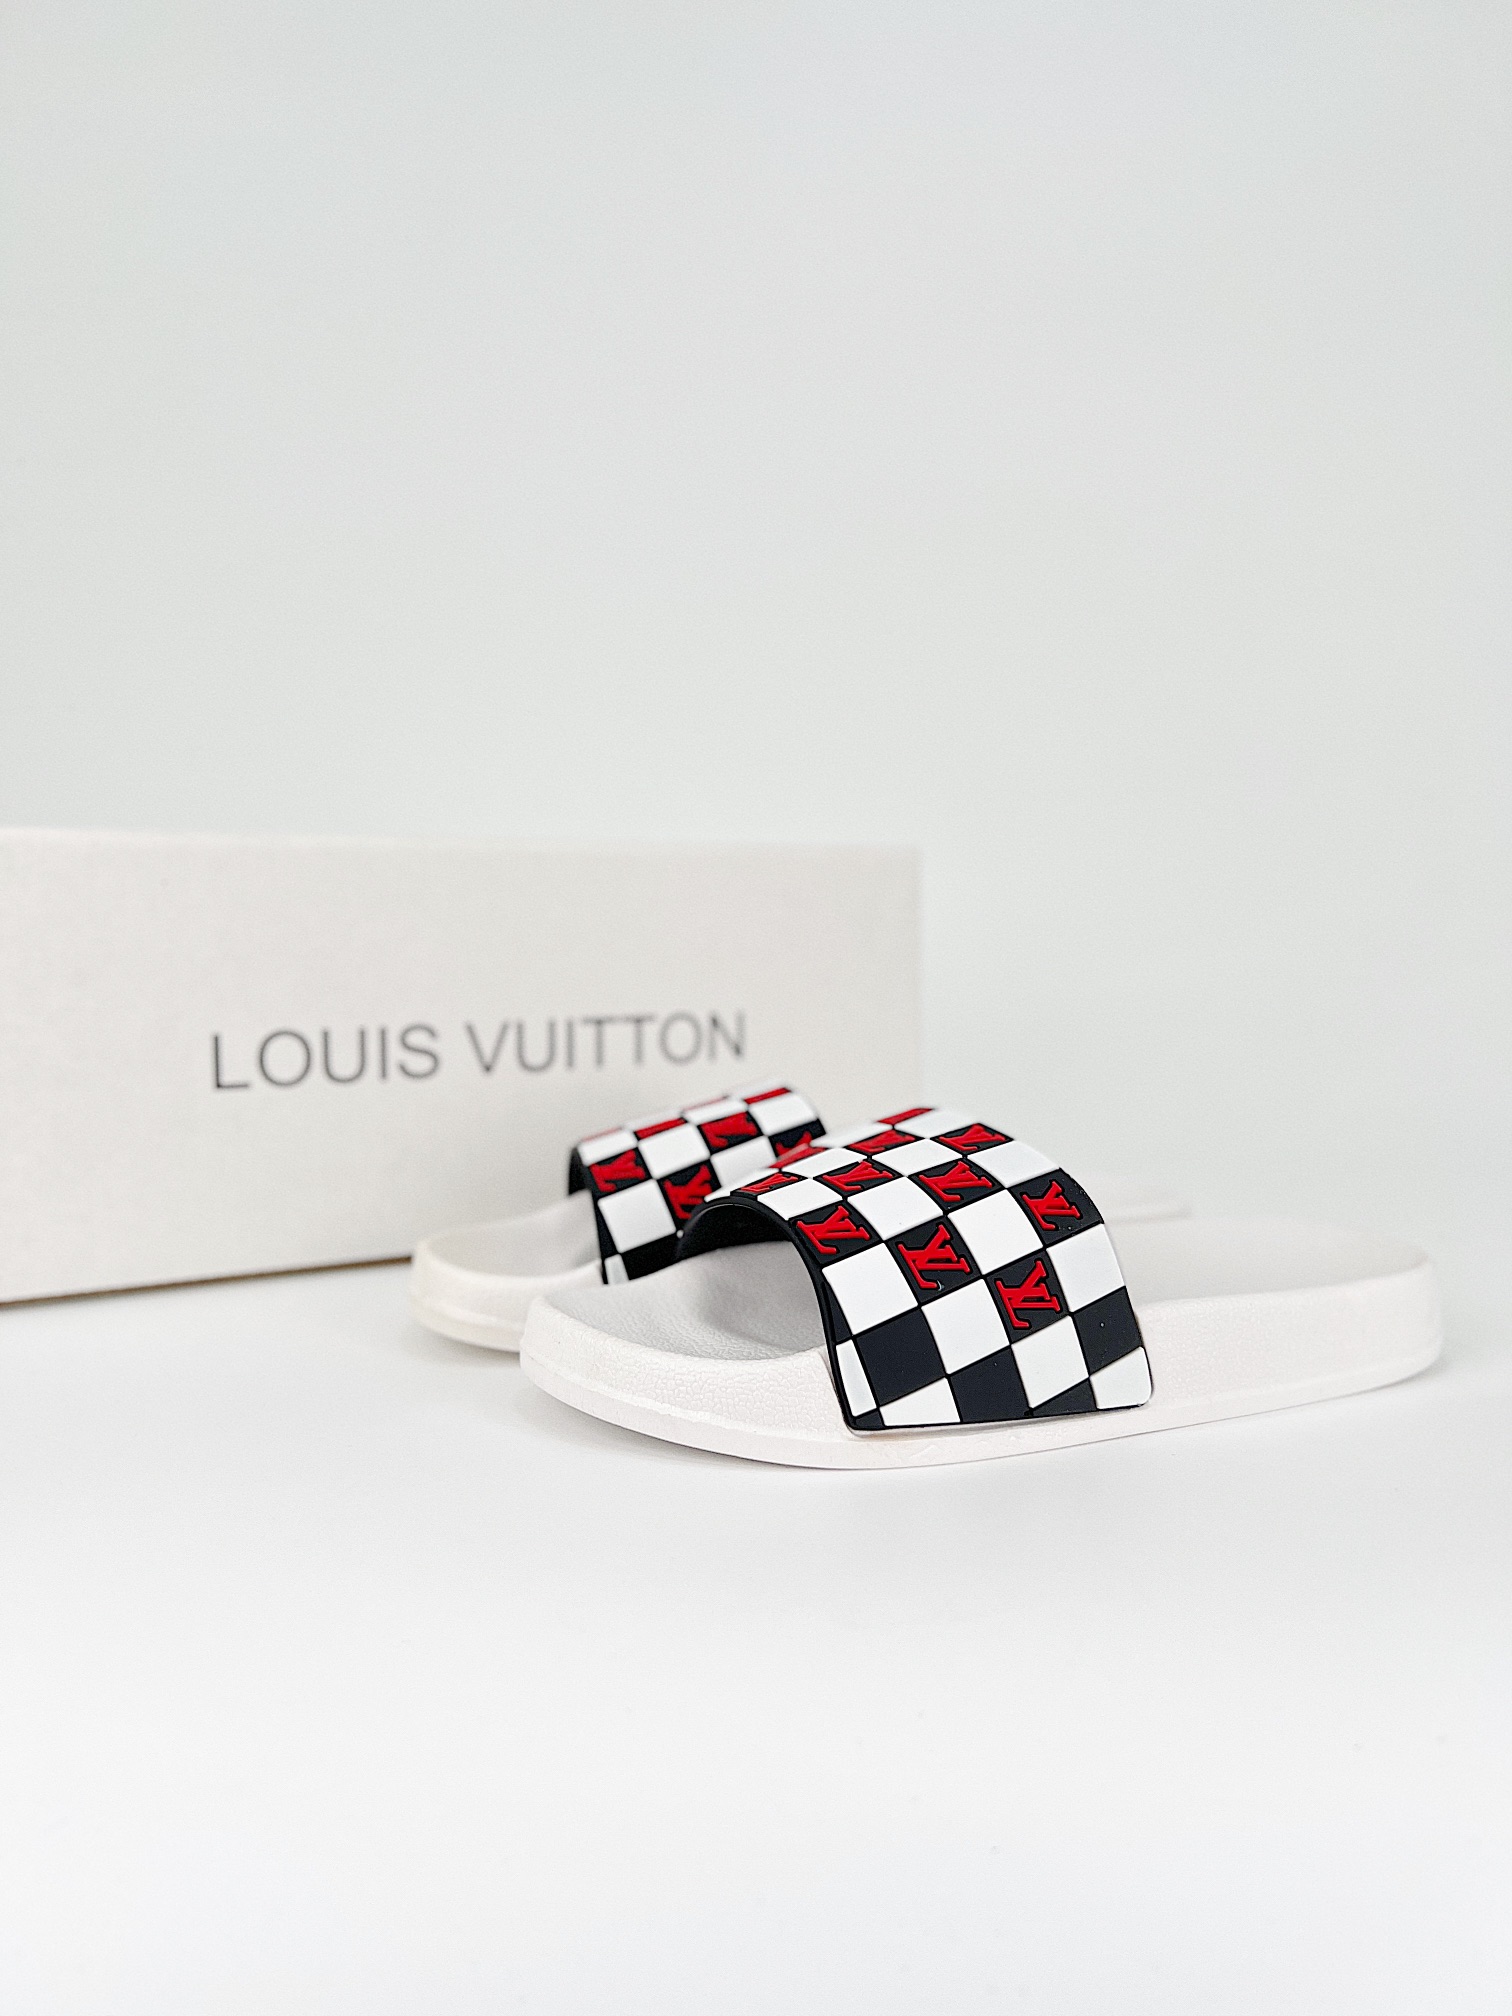 Louis Vuitton Shoes Slippers Printing Unisex Canvas Spring/Summer Collection